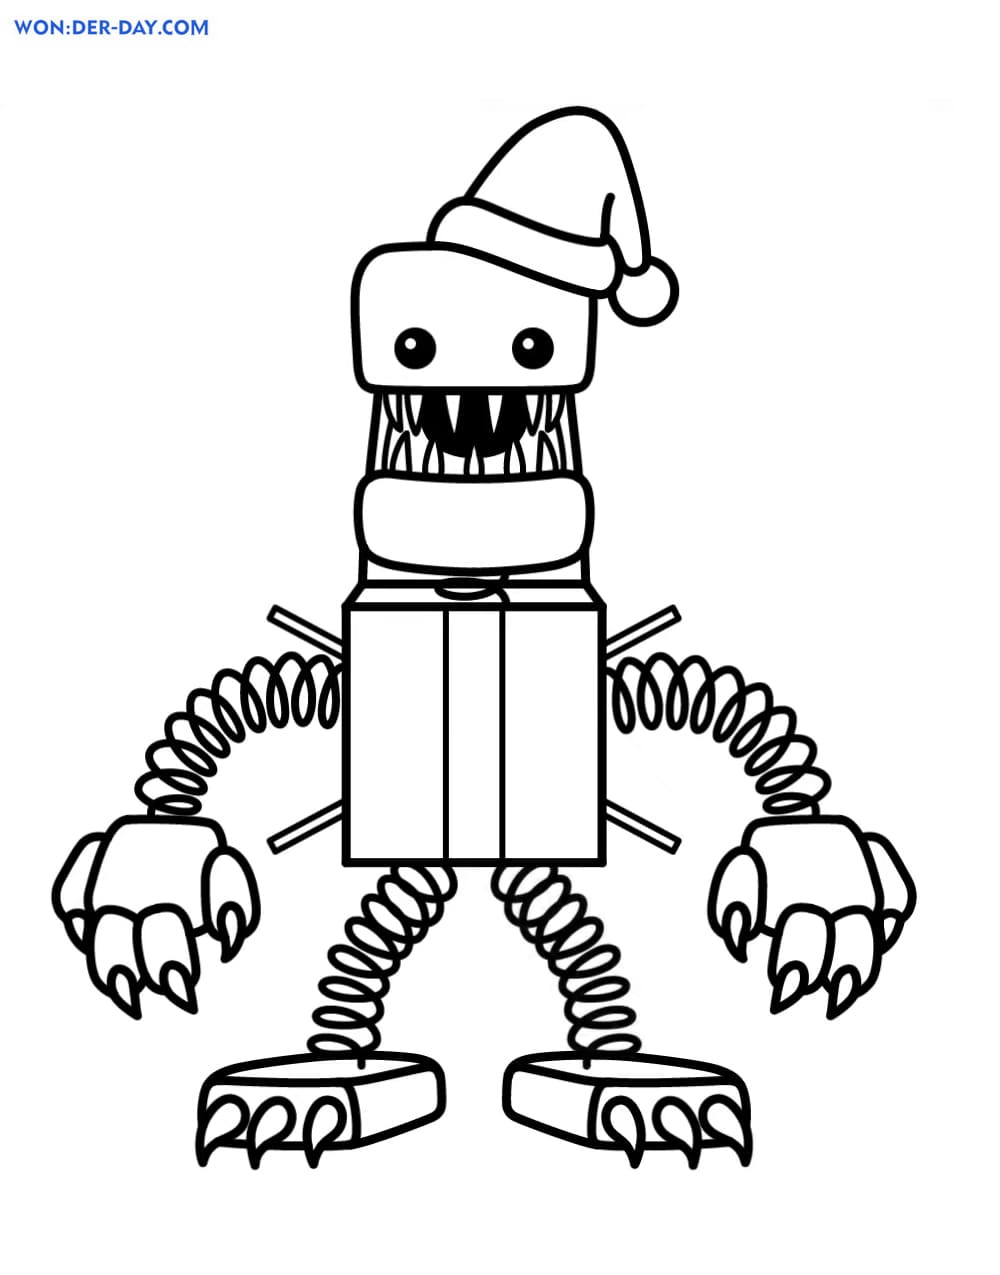 Boxy Boo Coloring Pages | WONDER DAY — Coloring pages for children and  adults